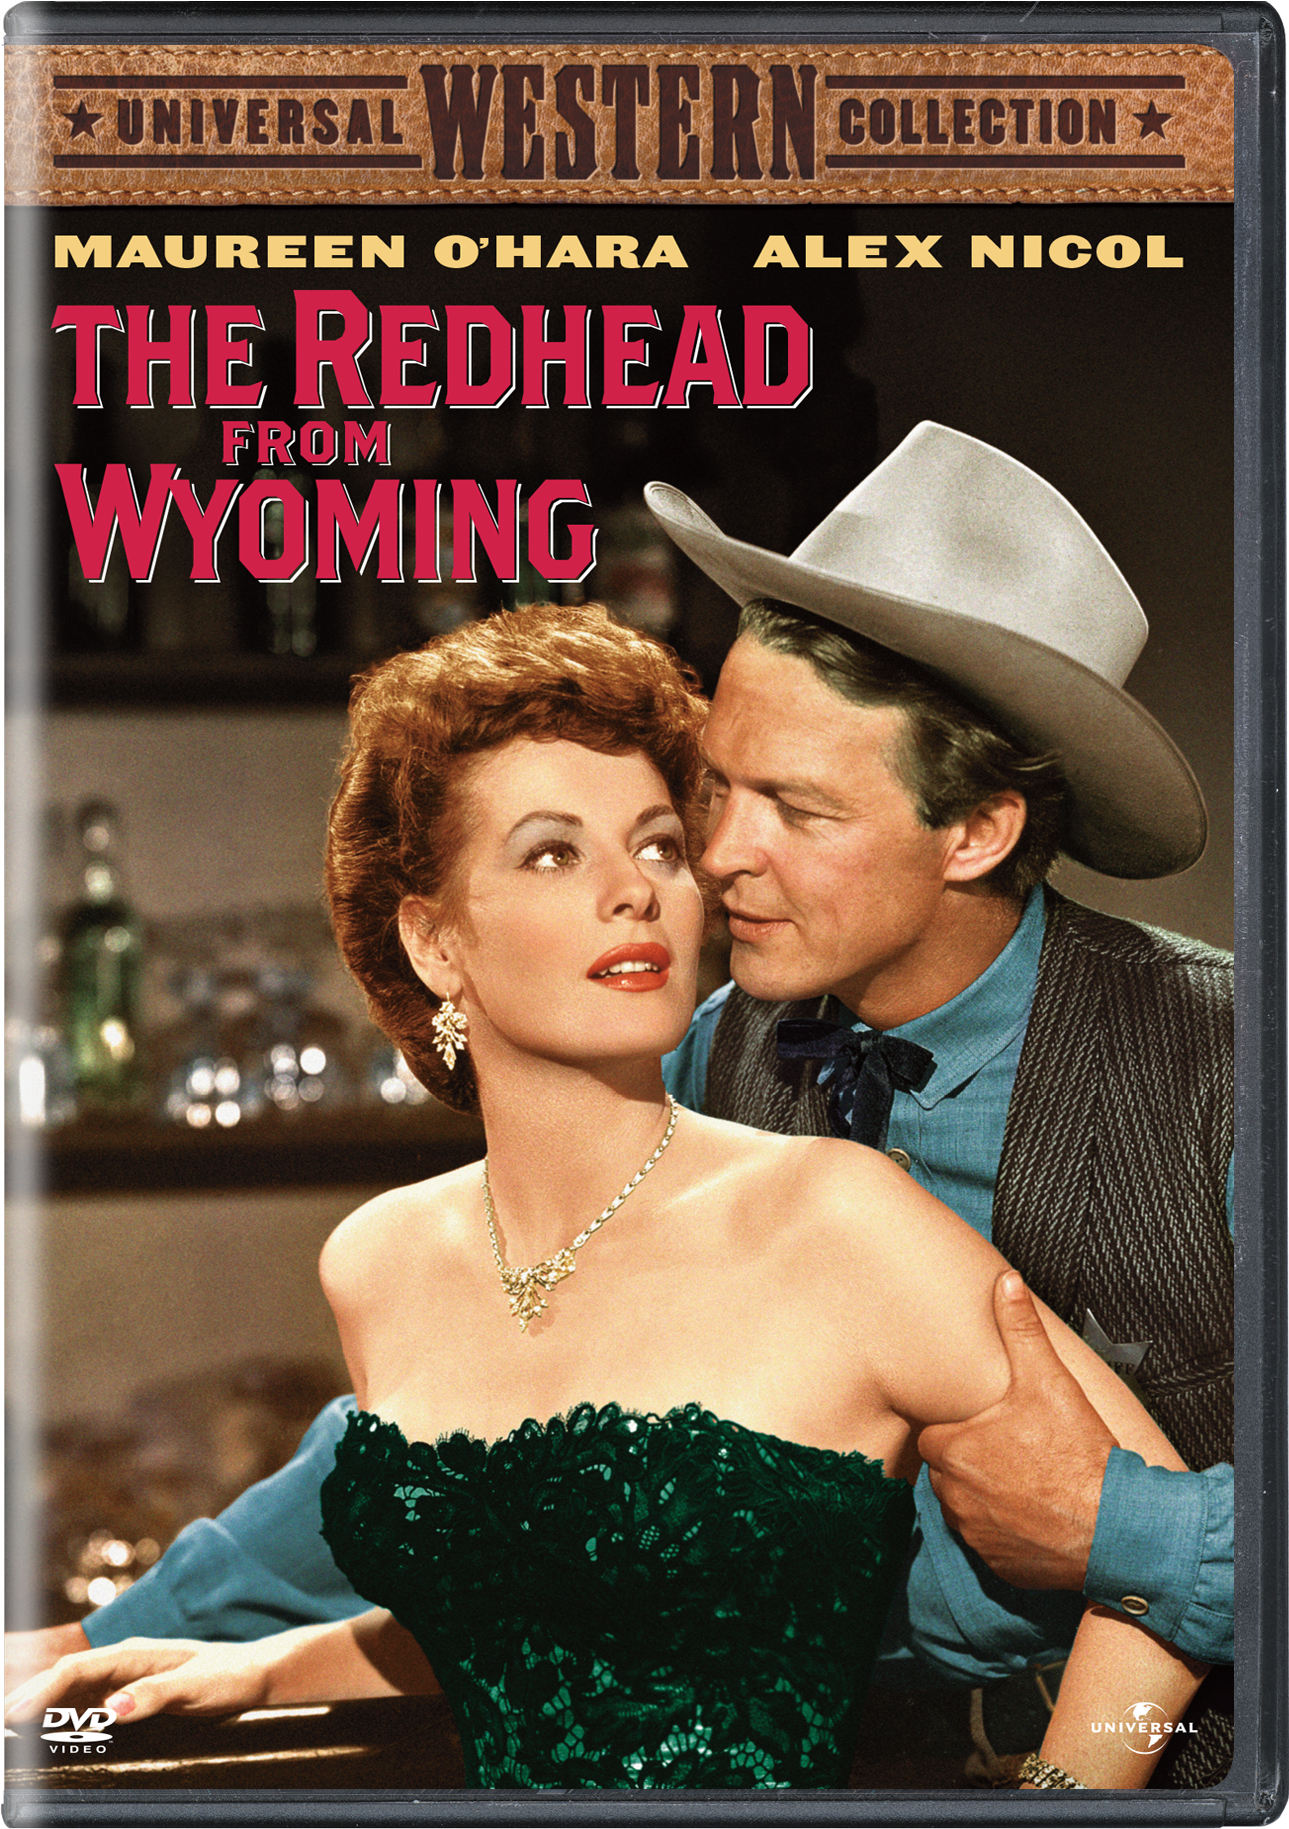 The Redhead From Wyoming - DVD [ 1953 ]  - Western Movies On DVD - Movies On GRUV